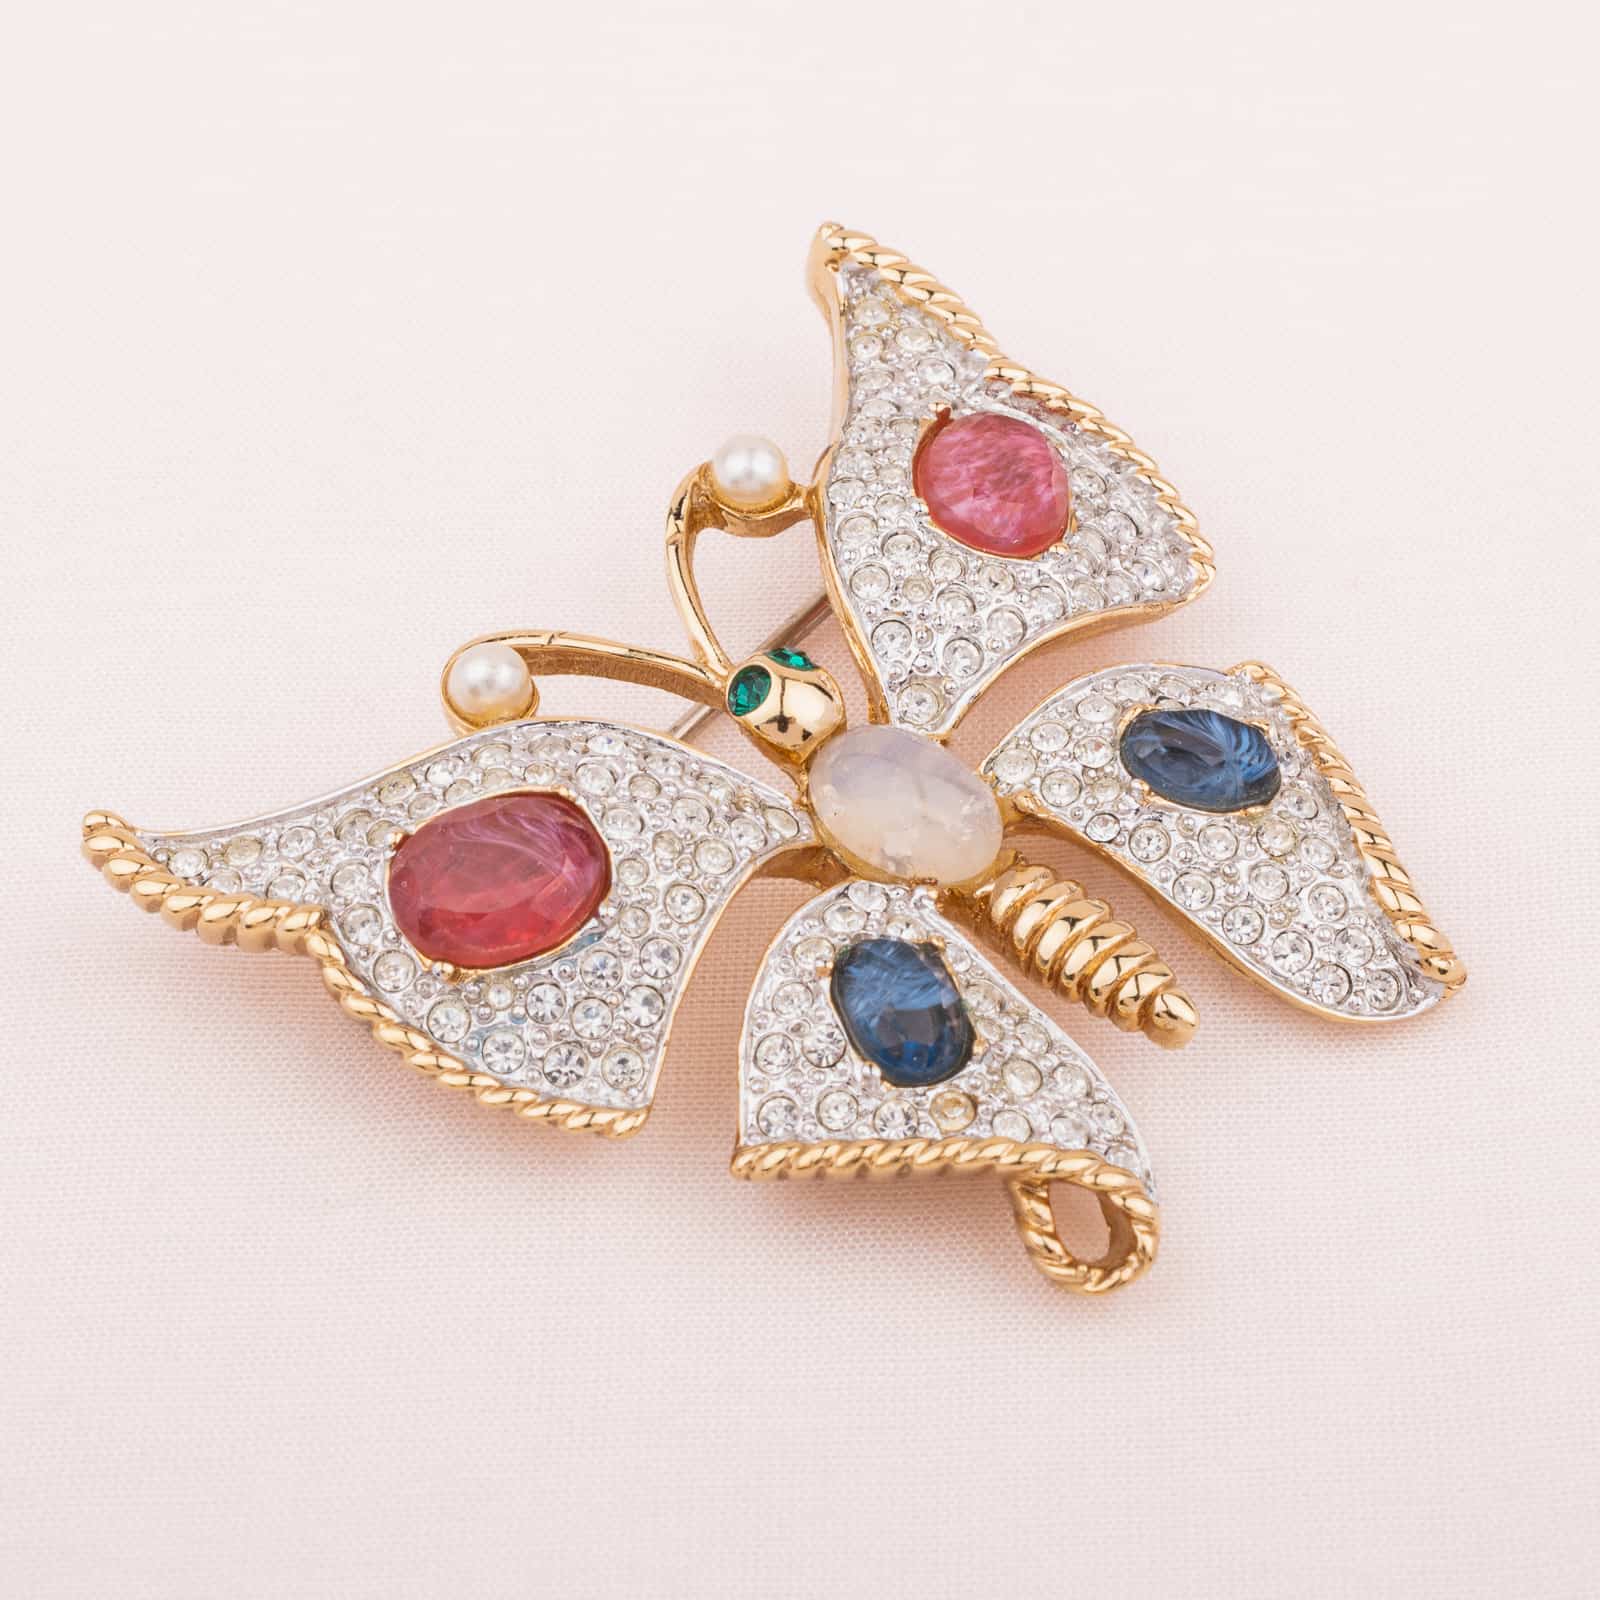 Gerry's Four Vintage Jewelry Pins Set - Ruby Lane